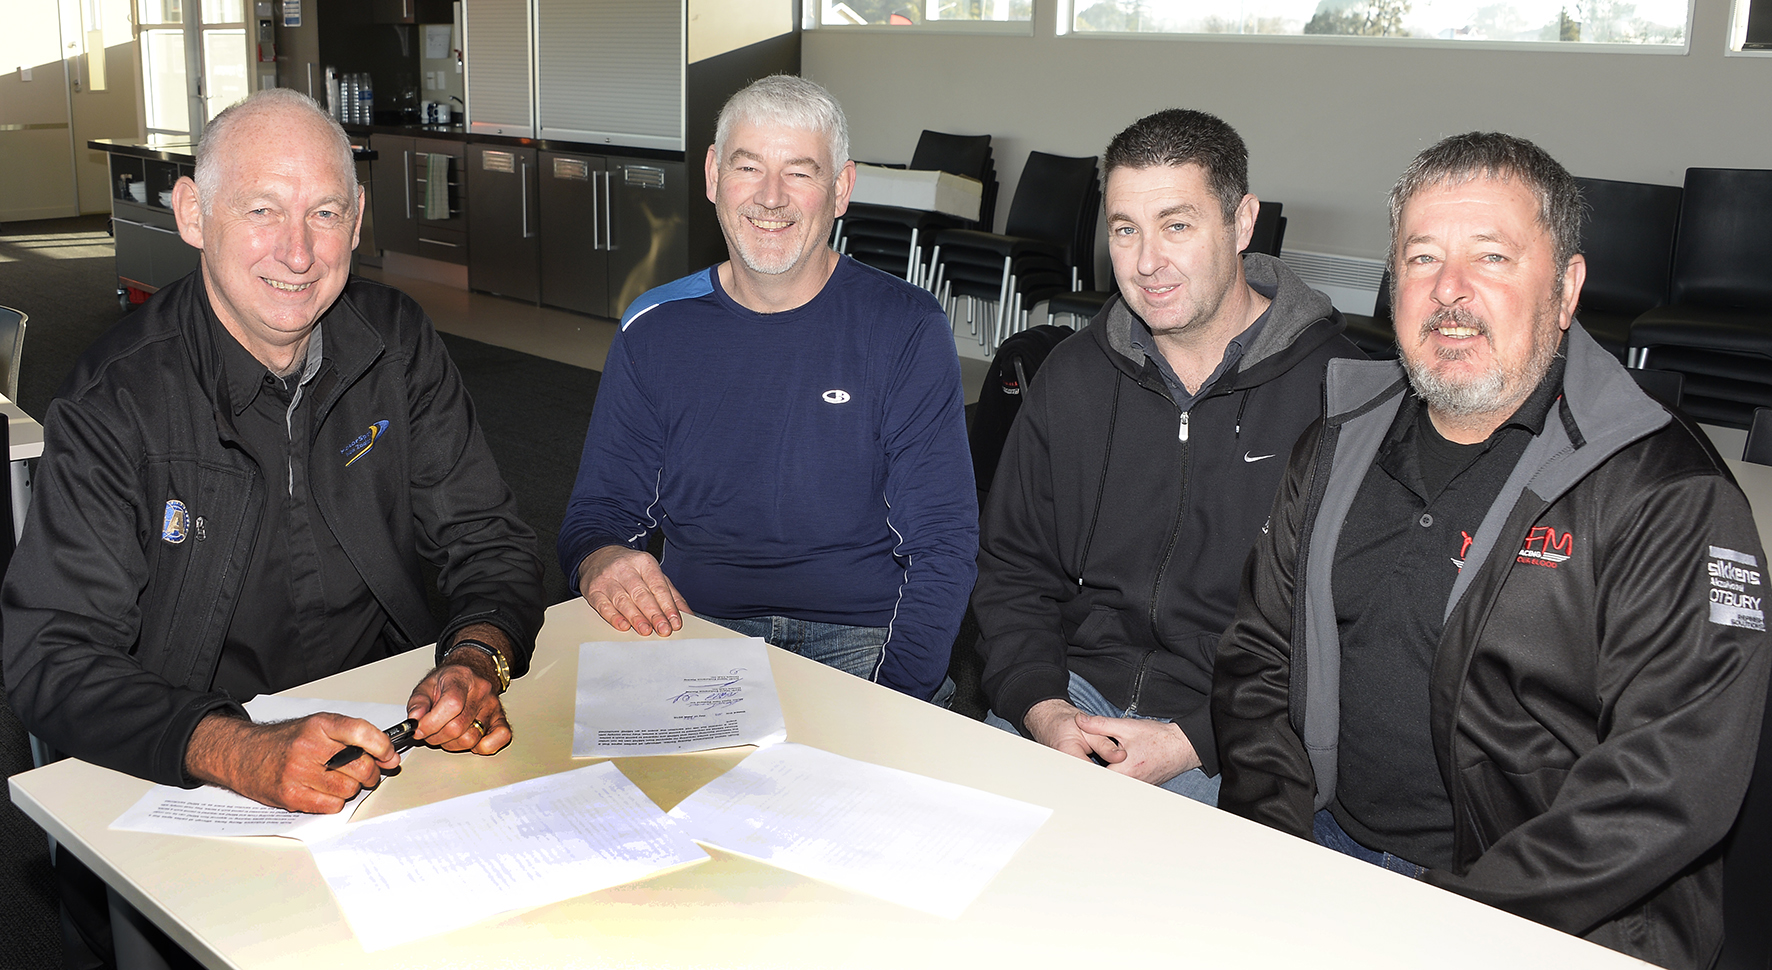 Long term agreement inked for NZ Endurance Racing